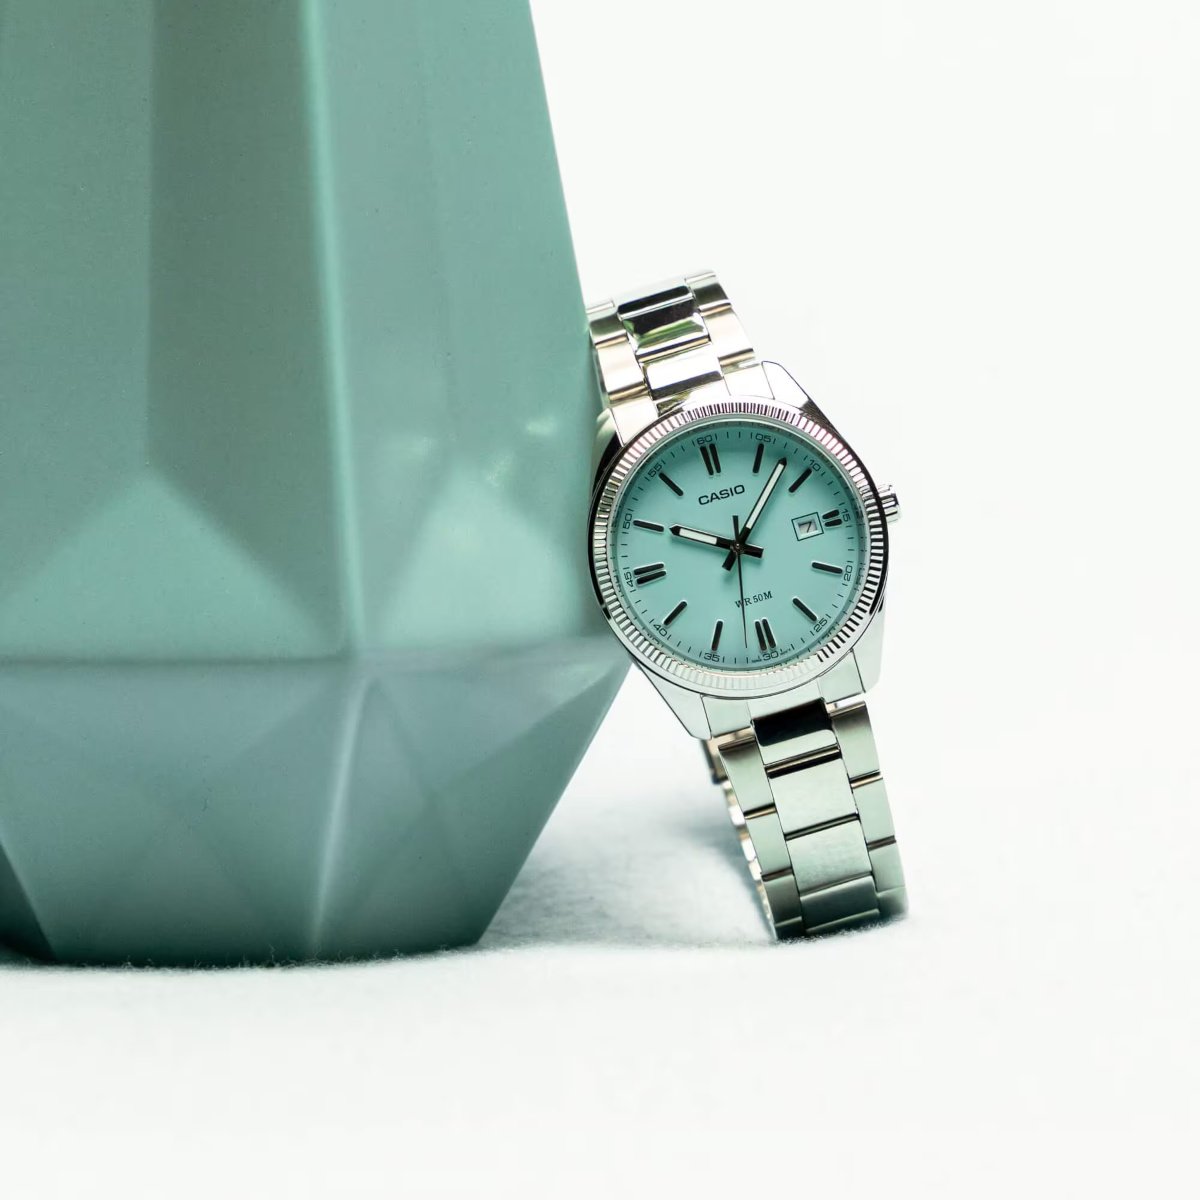 Tiffany Casio' MTP-1302PD-2A2V with turquoise blue dial is the 